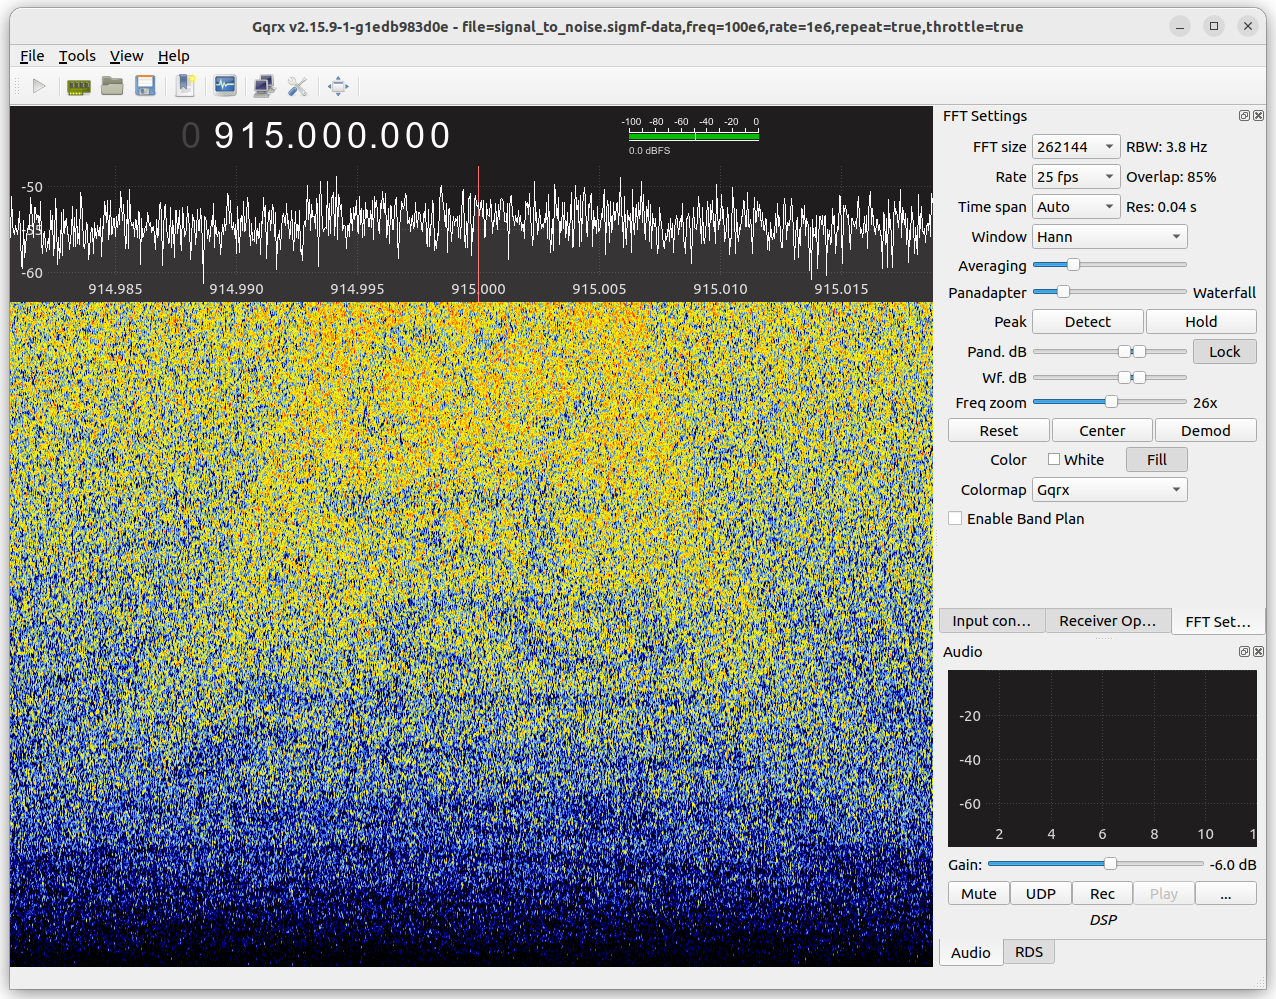 The middle of the flag for "Signal to noise", as viewed in Gqrx